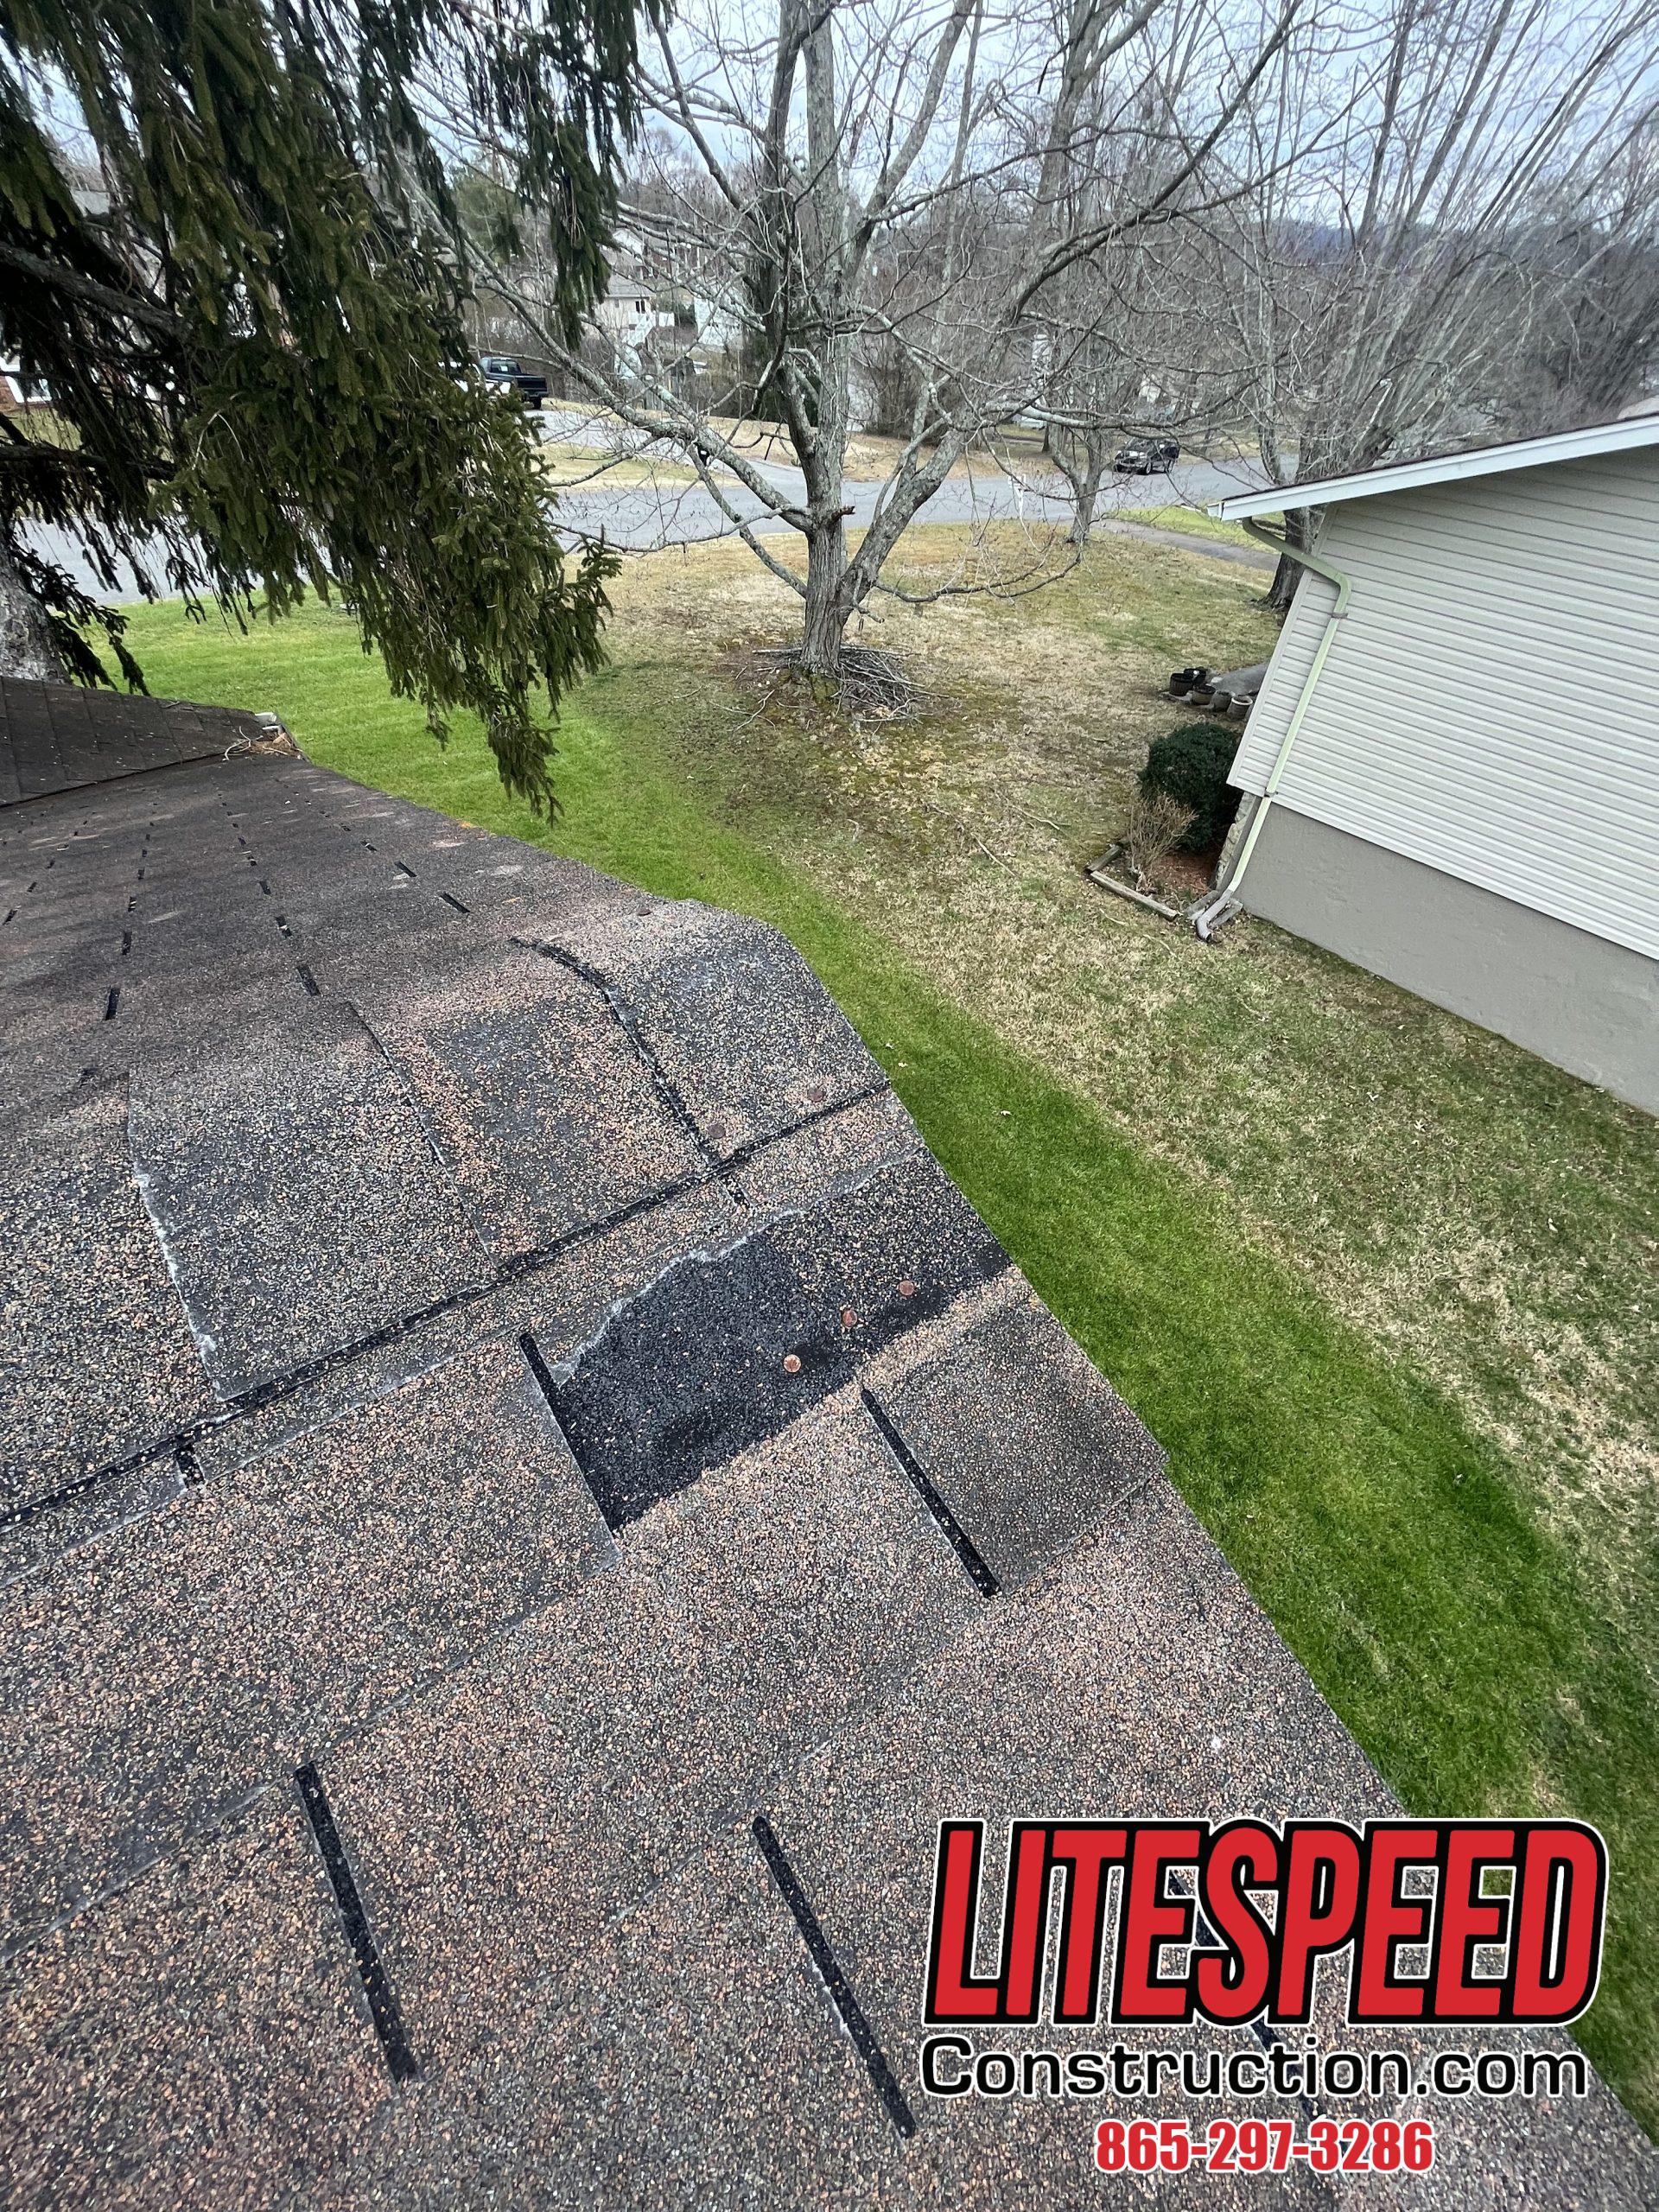 This is a picture of a brown three tab roof with missing tabs